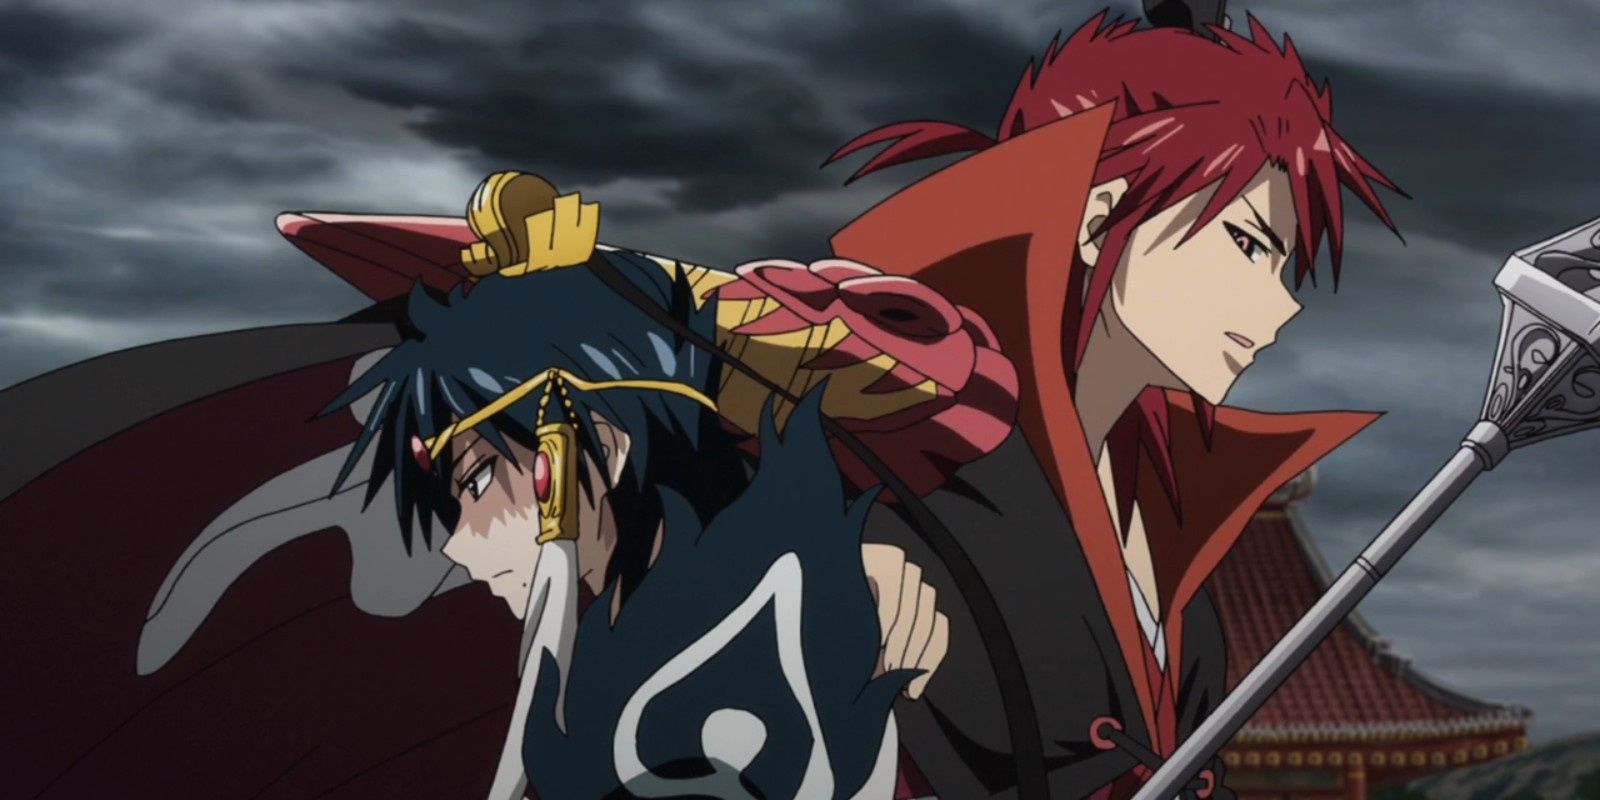 Kouen putting a hand on Hakuryuu's shoulder as he passes by in Magi: Labyrinth of Magic. 